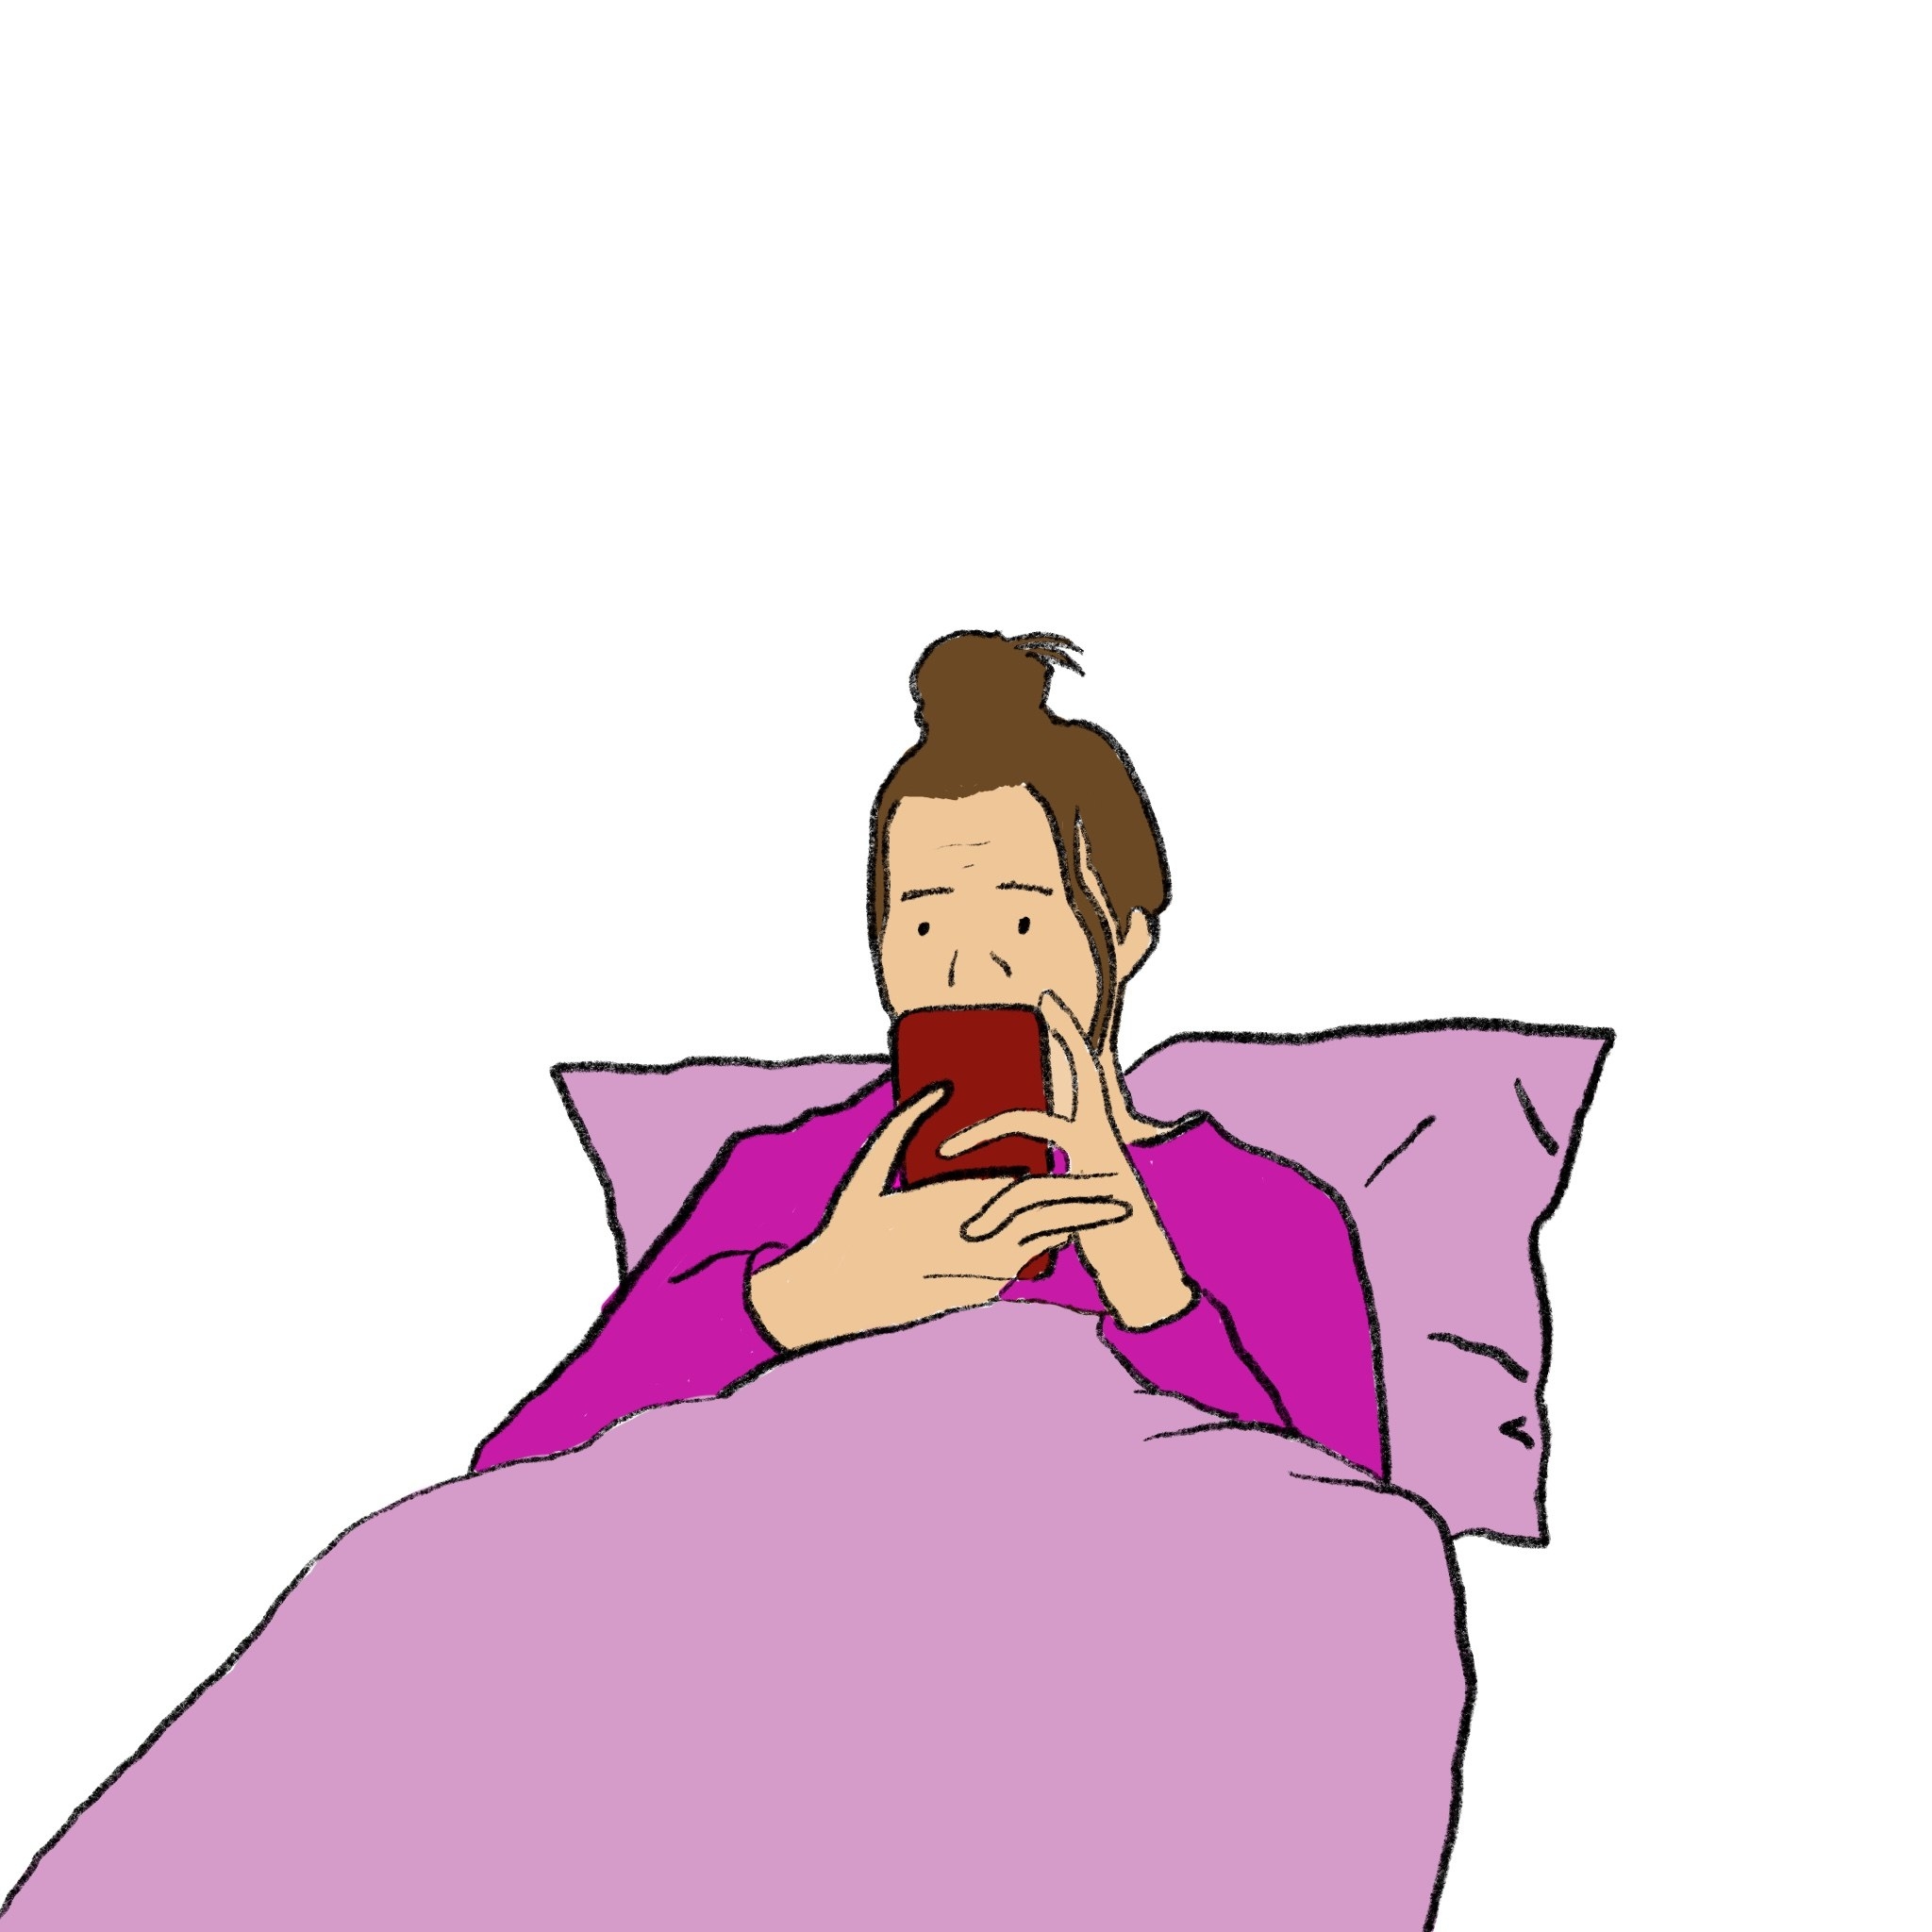 texting in bed